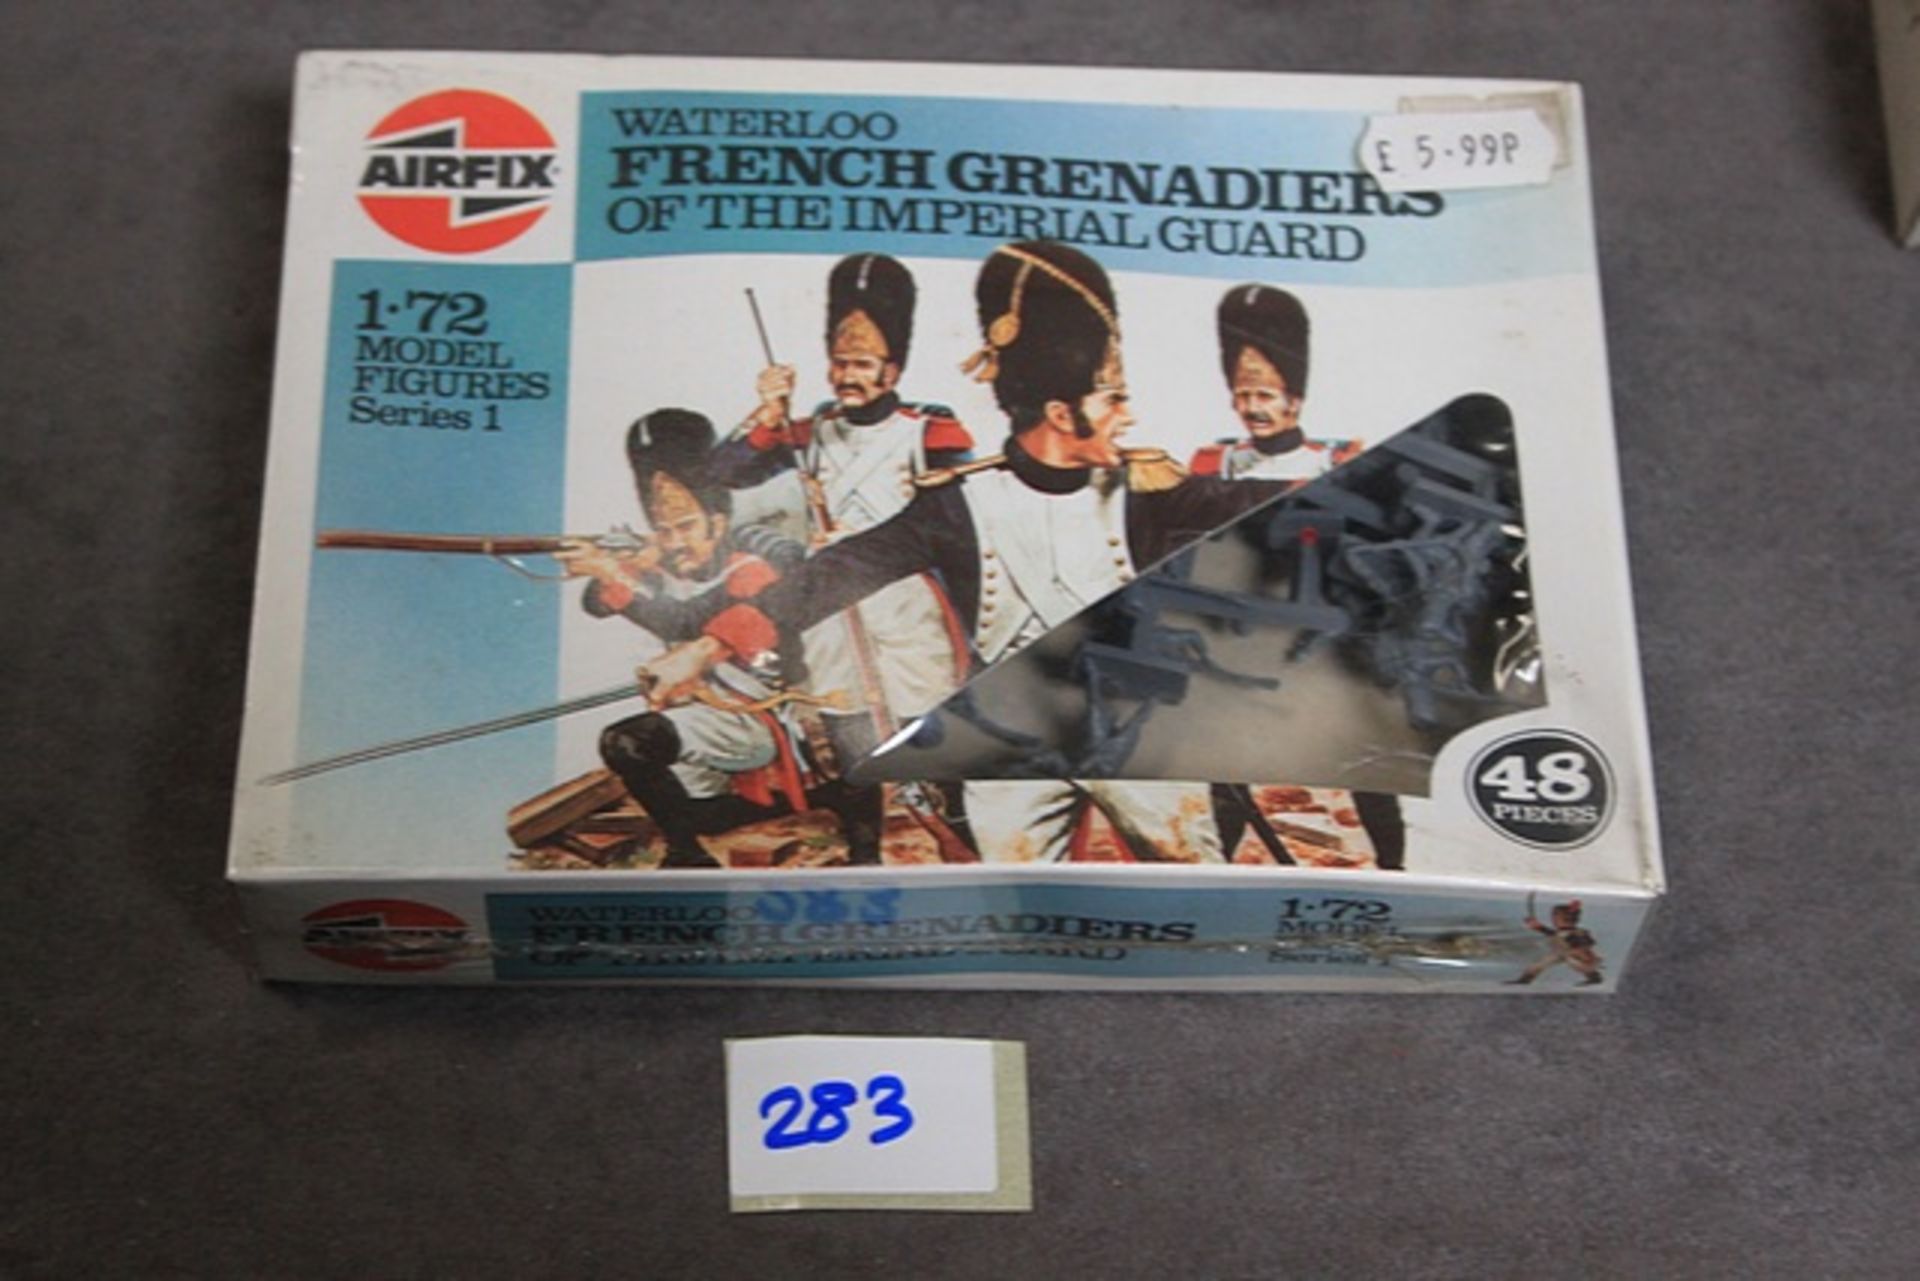 Airfix Scale 1/72 Waterloo French Grenadiers Of The Imperial Guard Series 1 #01749 In Original